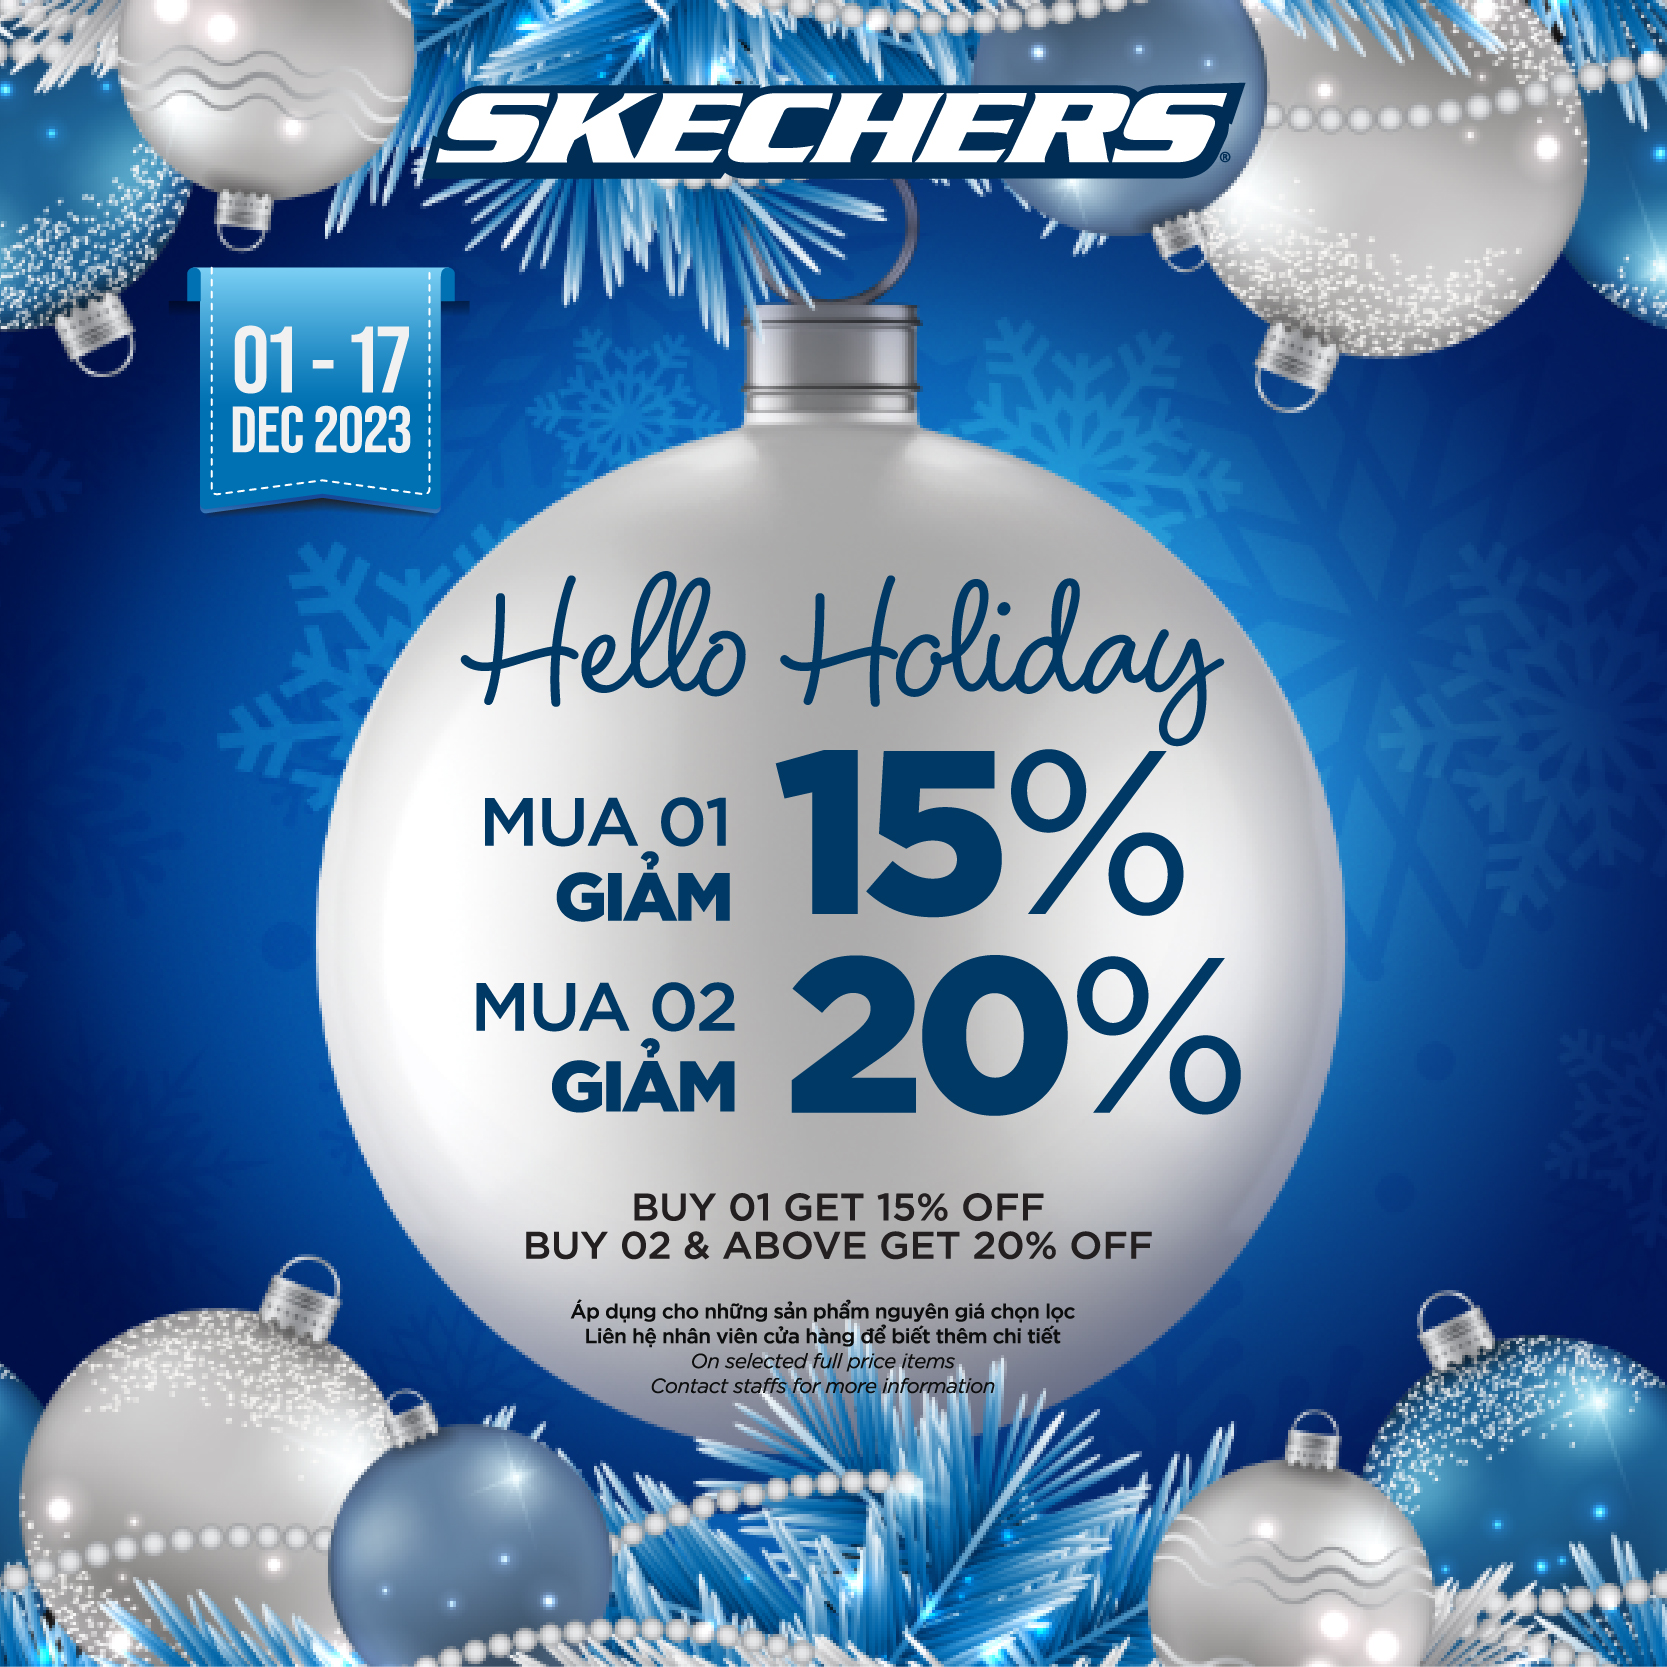 SKECHERS HELLO HOLIDAY PROMOTION